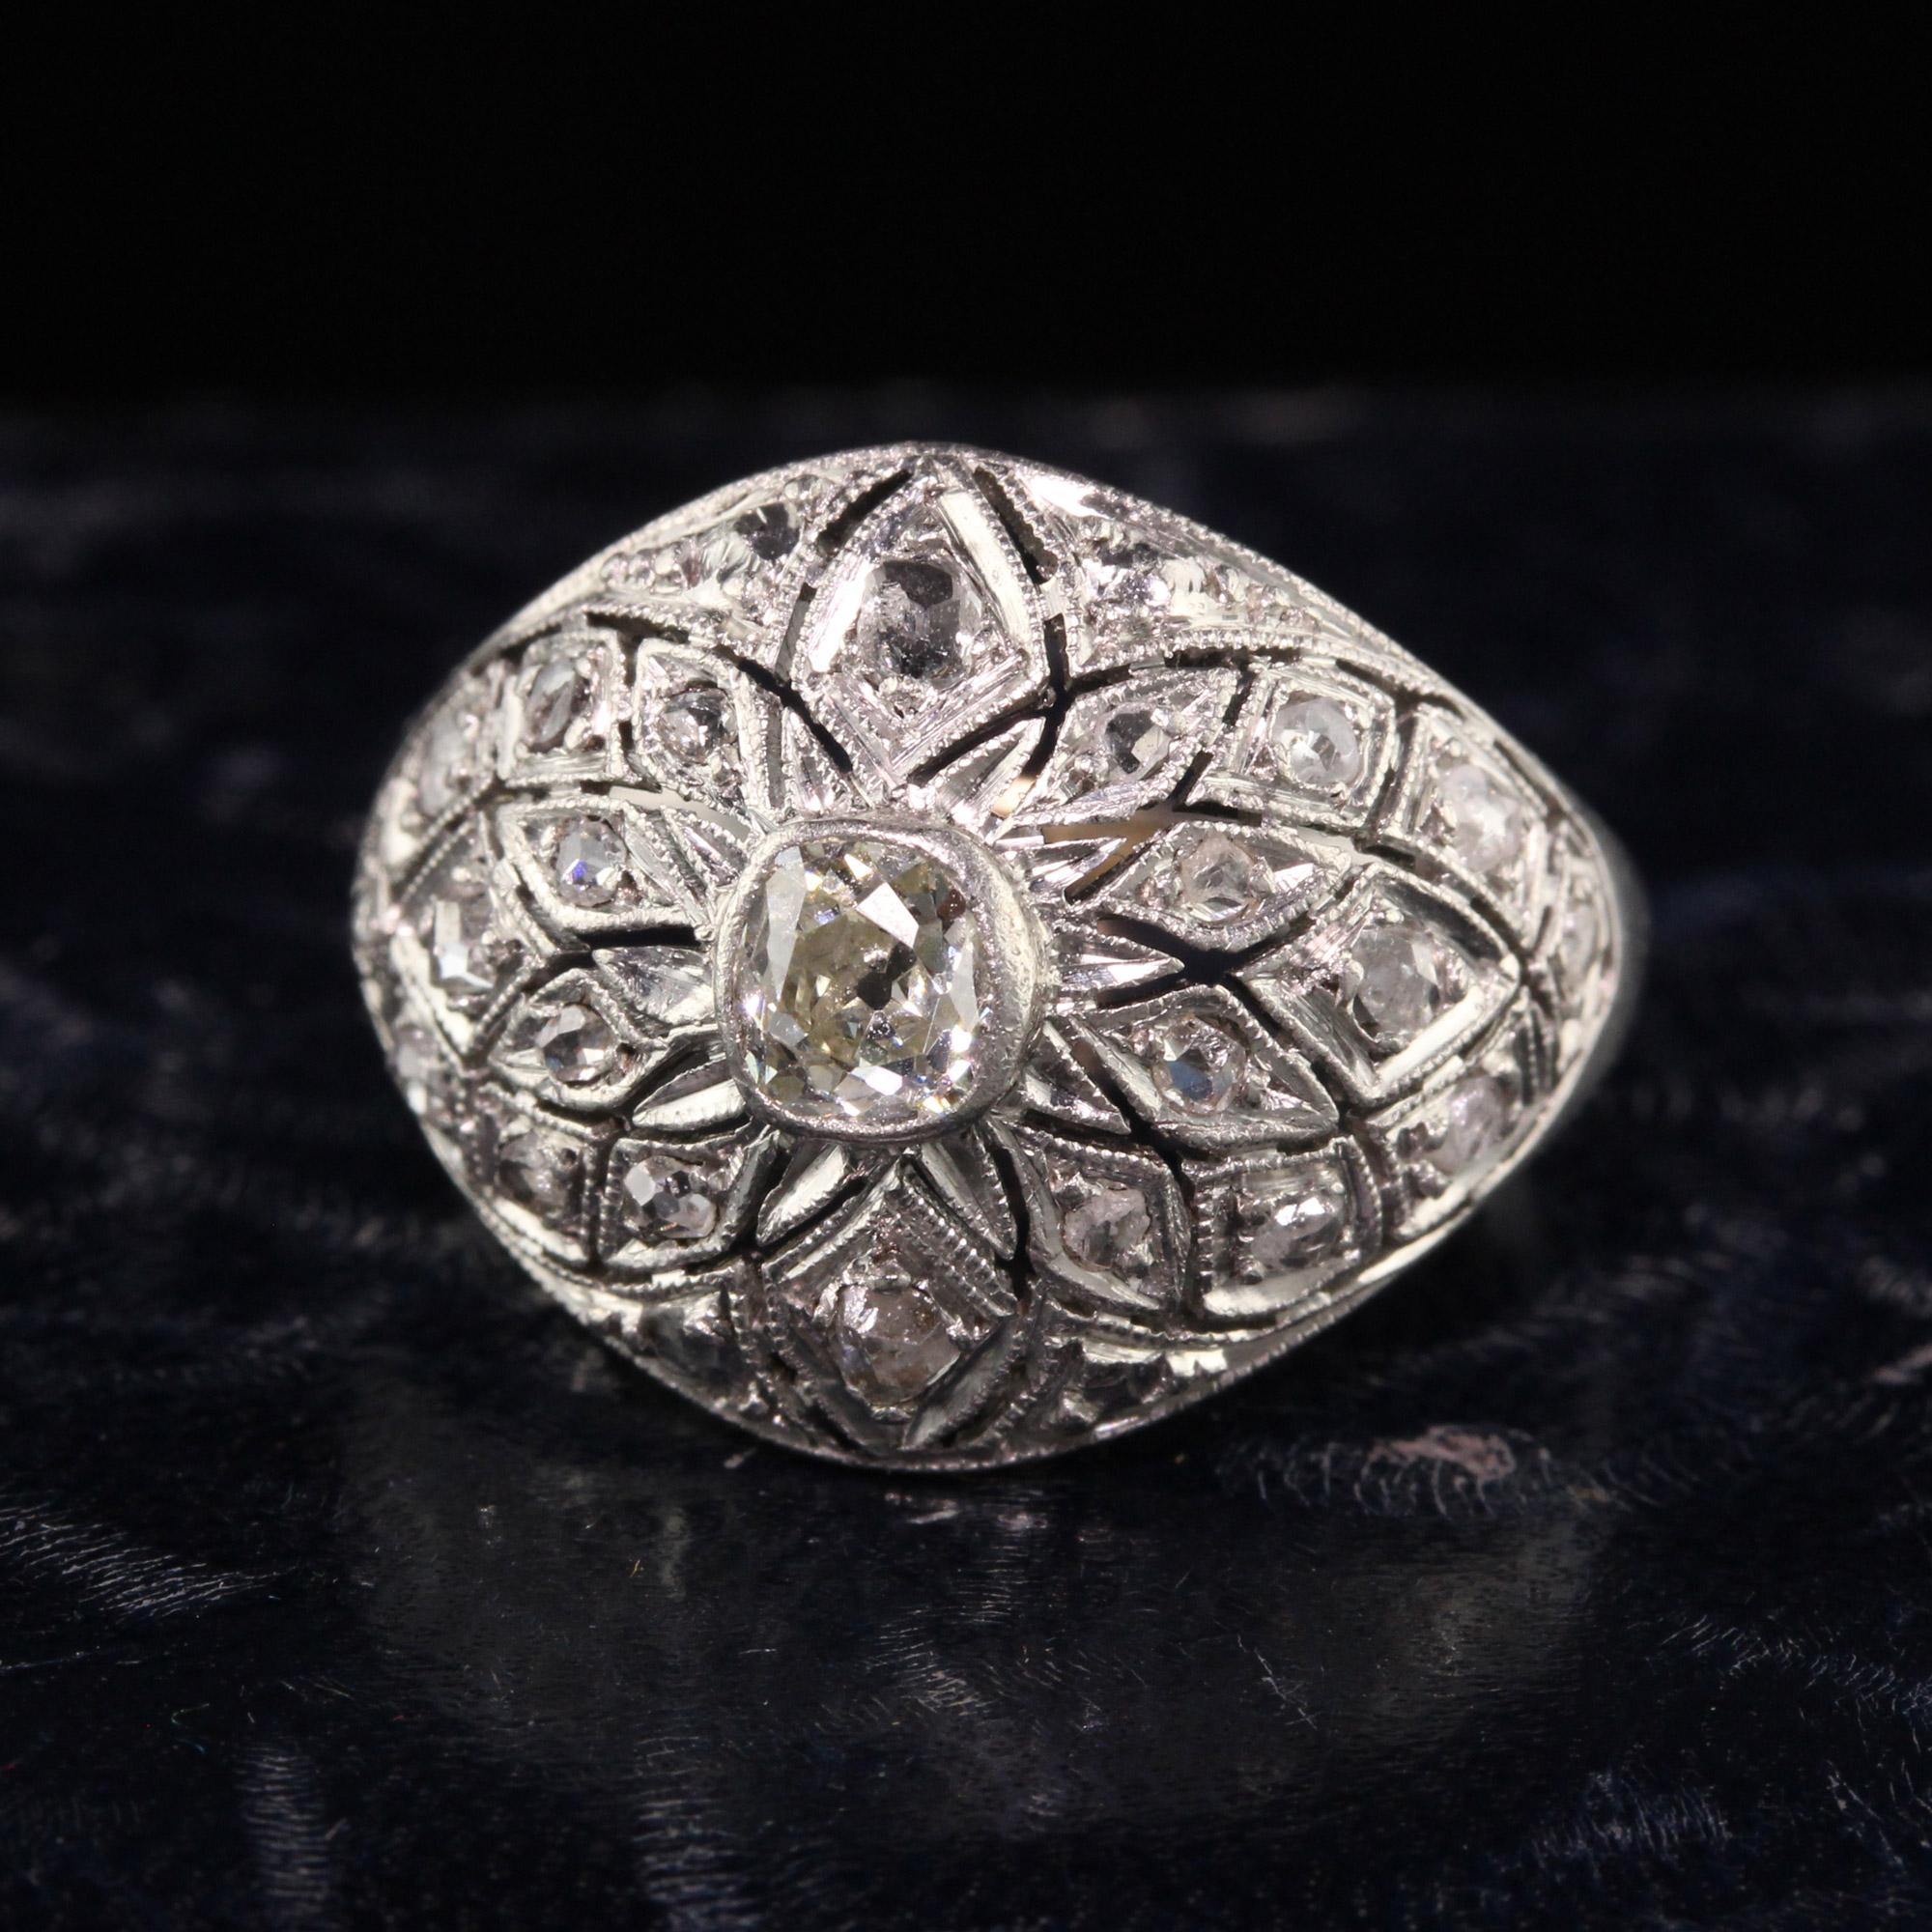 Beautiful Antique Art Deco Platinum Old Mine Rose Cut Diamond Domed Ring. This gorgeous art deco ring is crafted in platinum. The center holds an old mine cut diamonds and is surrounded by rose cut diamonds.

Item #R1221

Metal: Platinum

Weight: